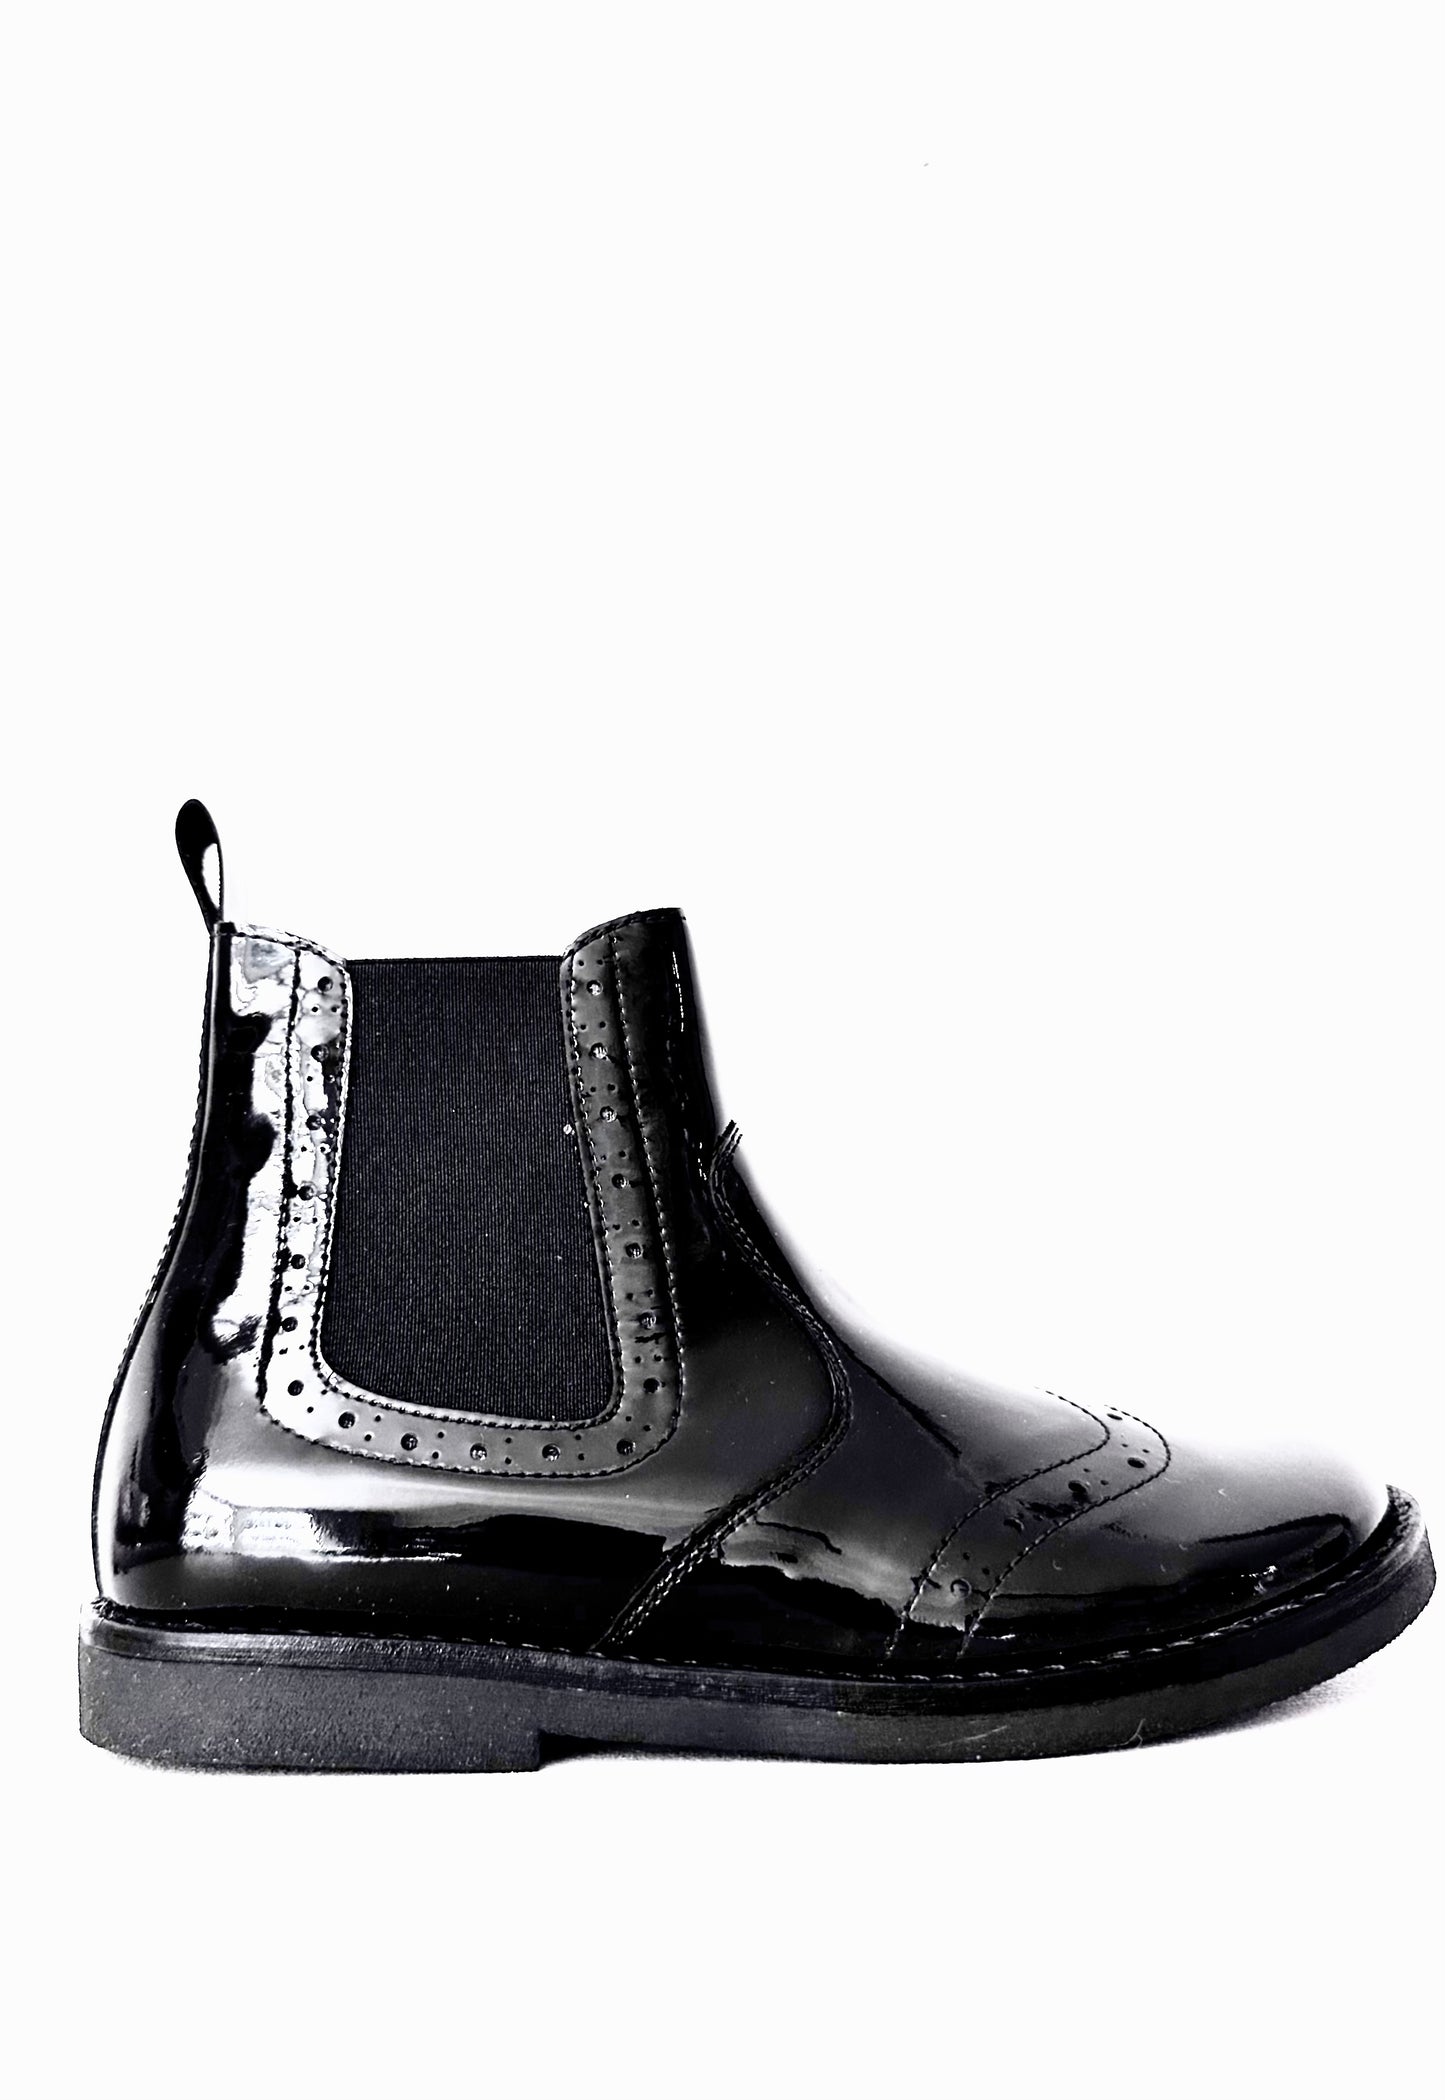 Froddo Black Patent Leather Boots